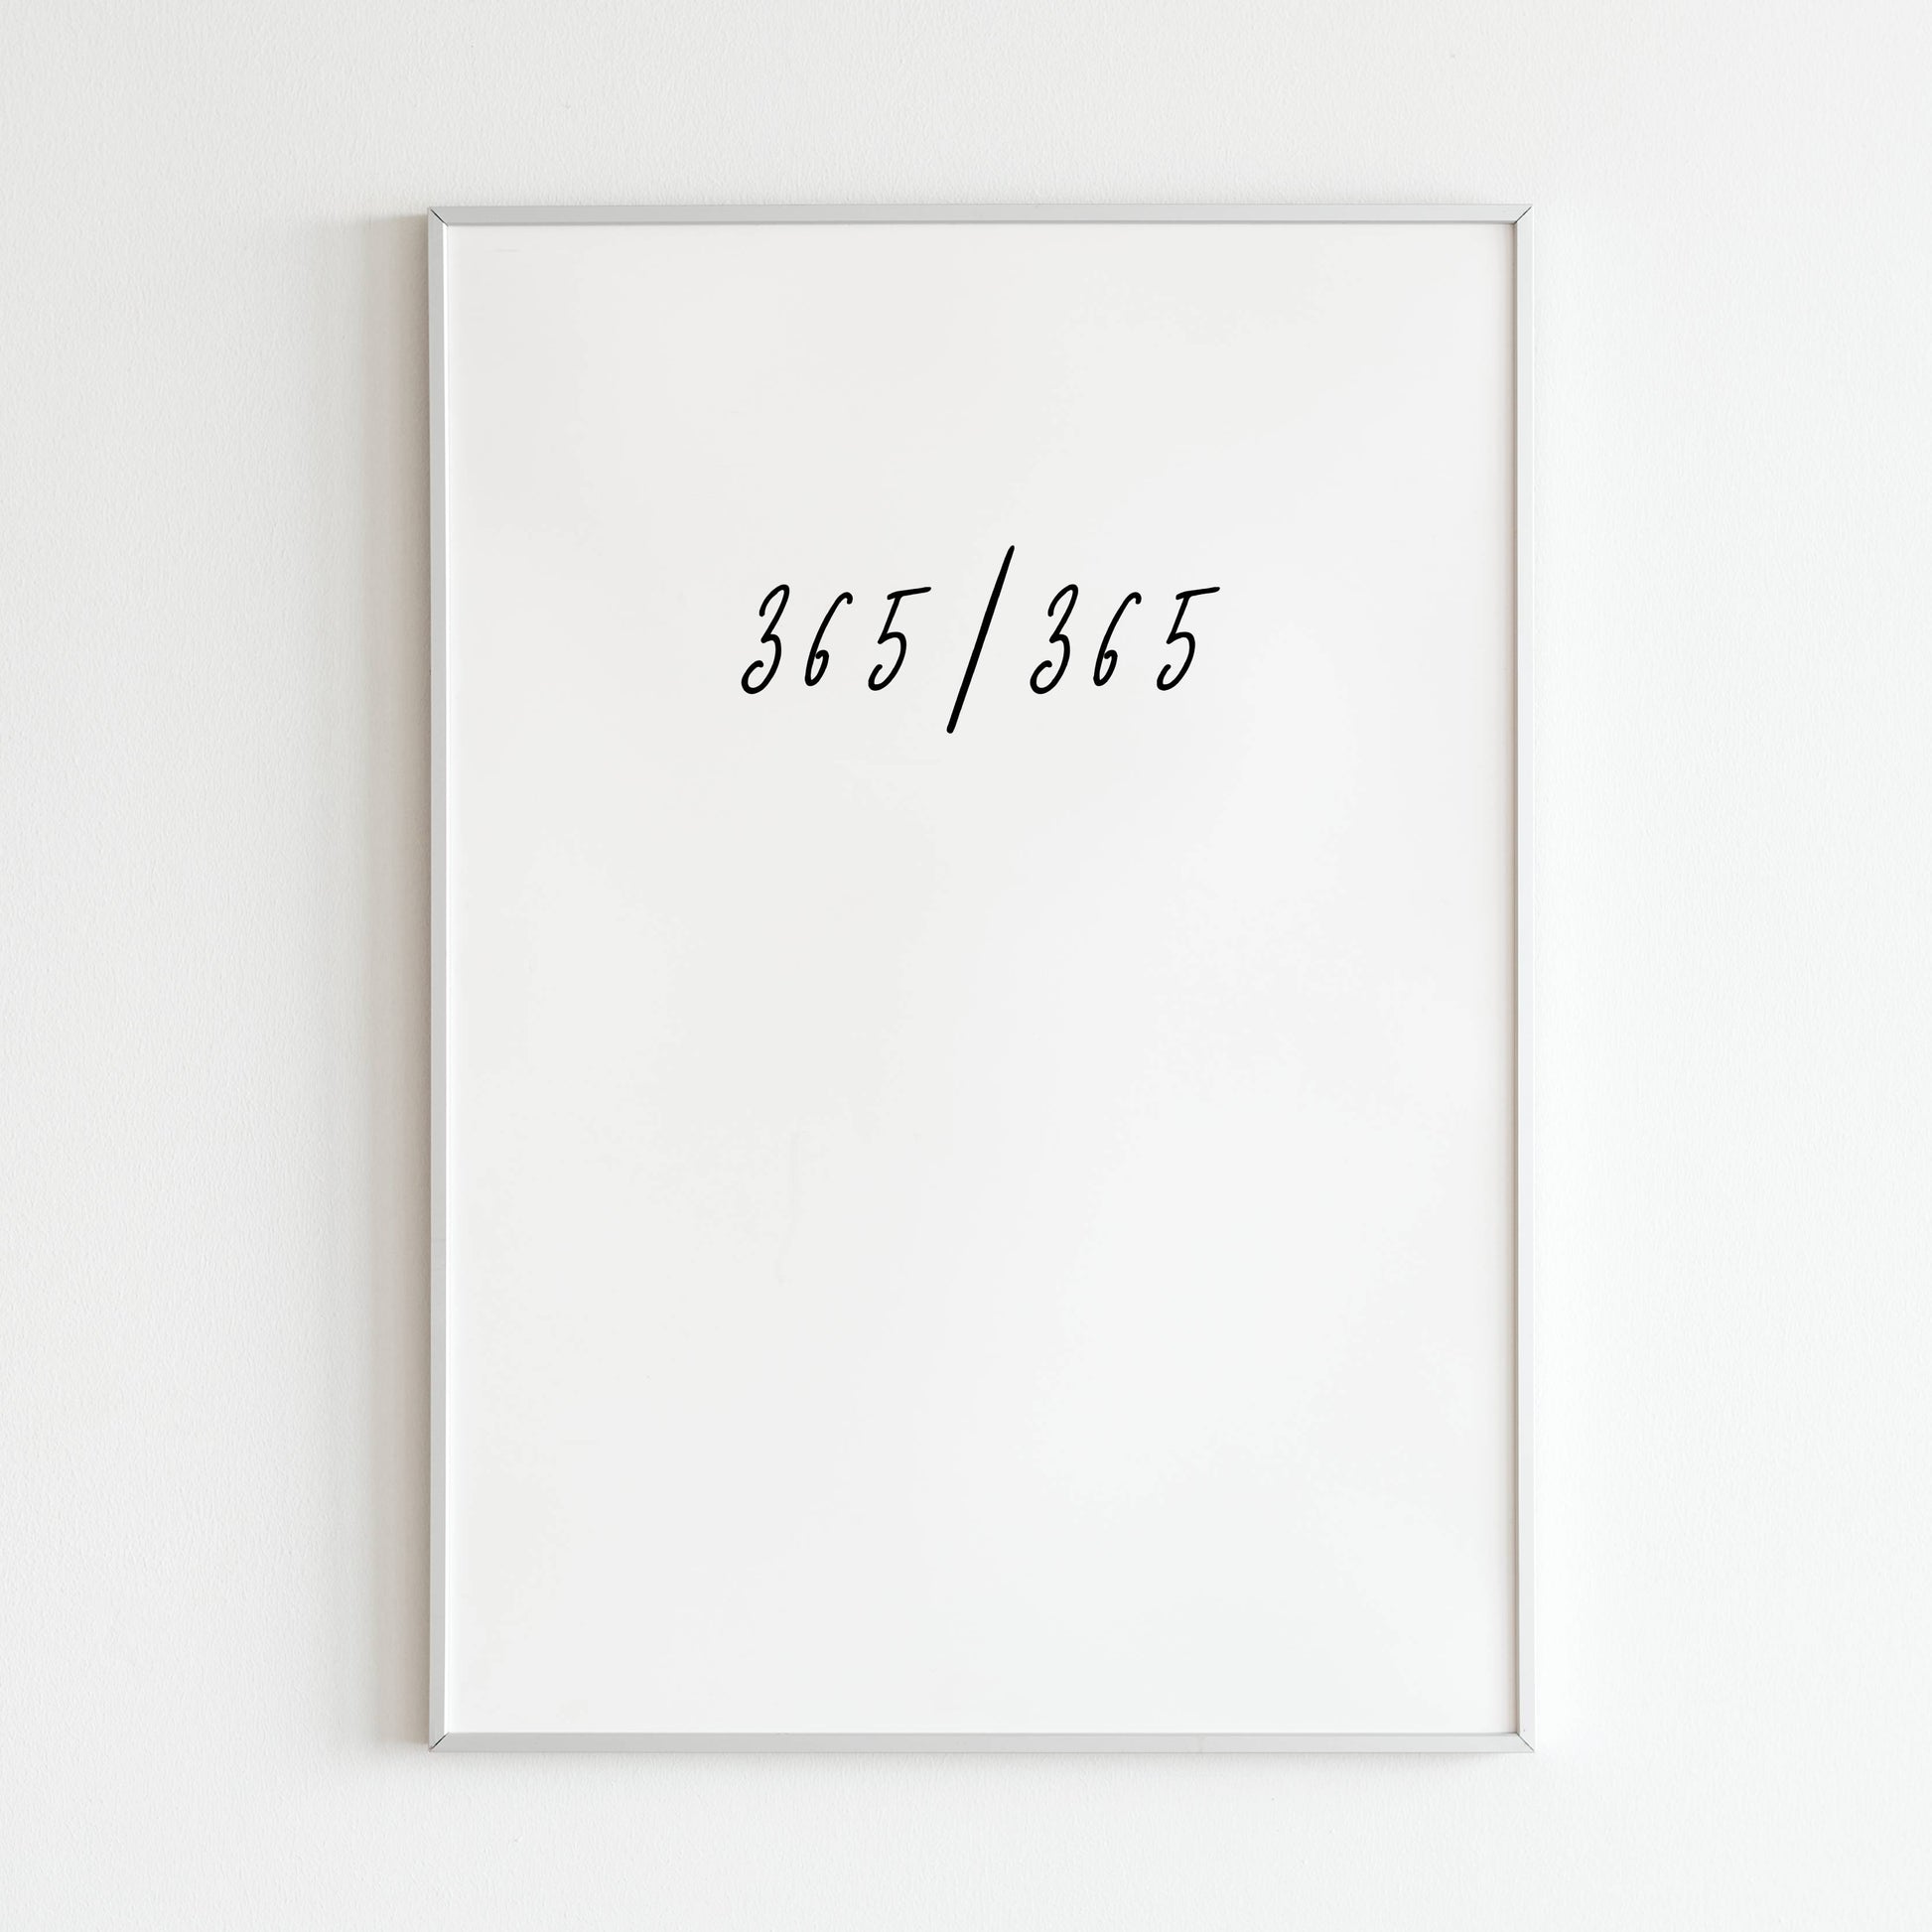 Printable "365/365" artwork, a reminder to cherish every day.